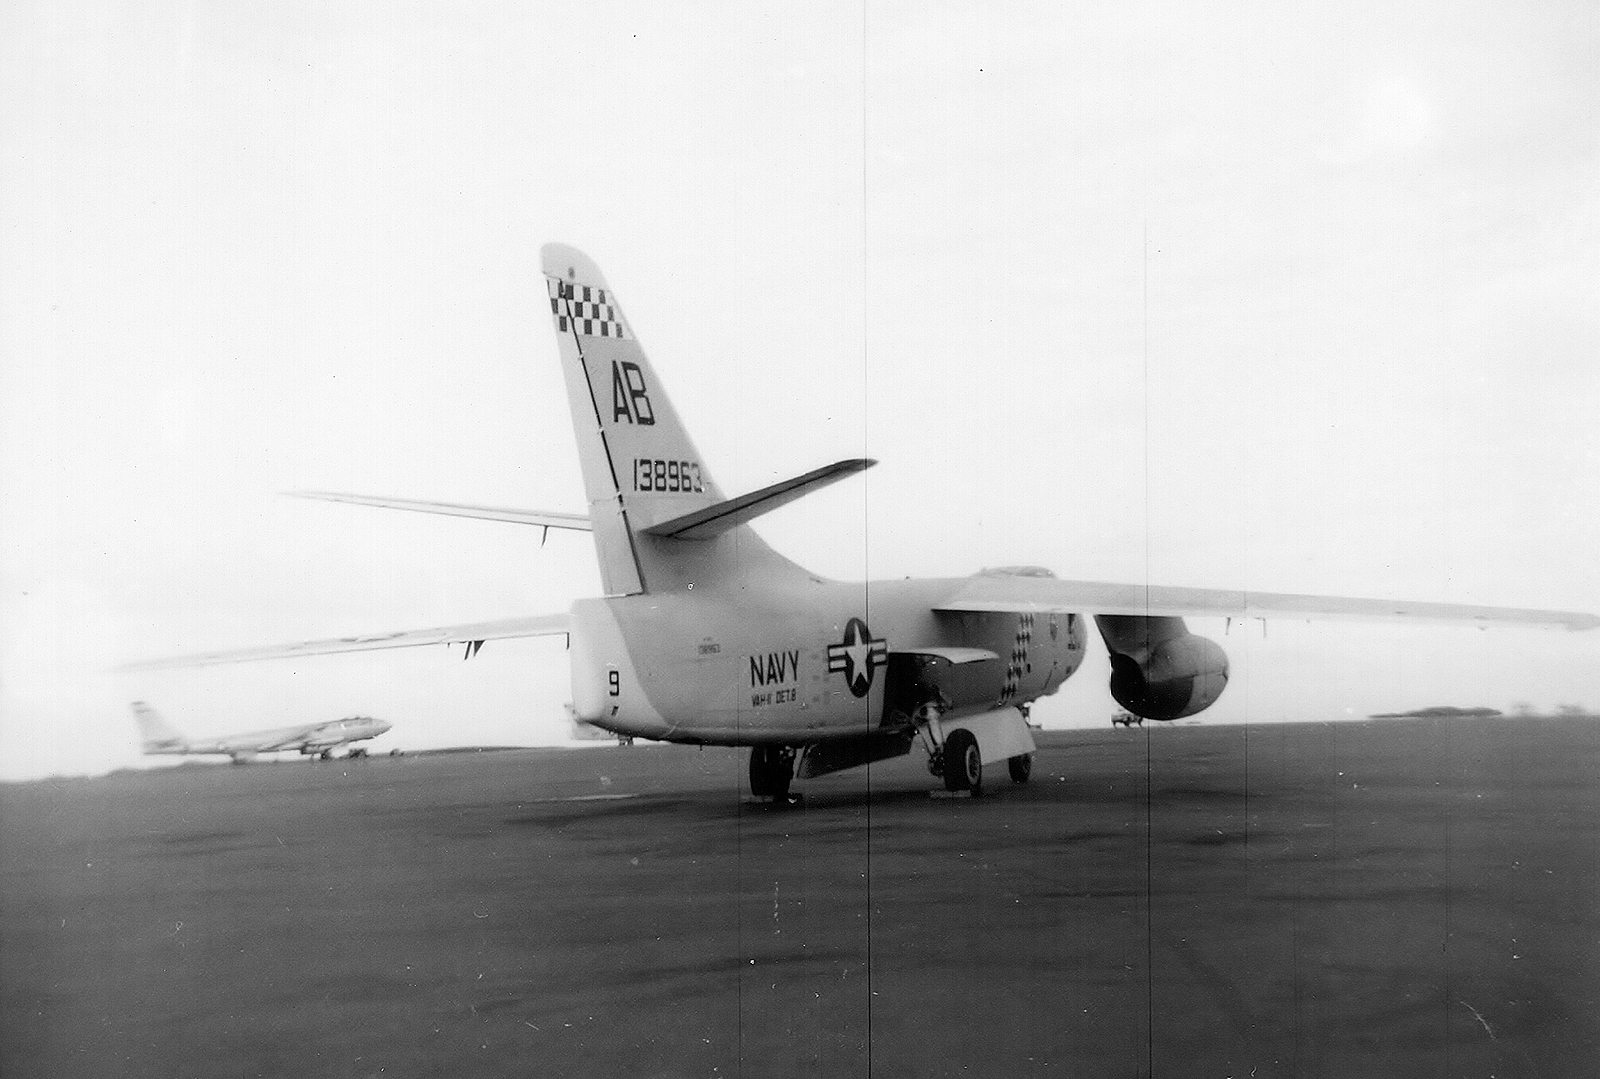 Another of the two Douglas A-3 Skywarriors from the USS Independence which stopped for repairs on Keflavik. Note the WB-47E weather plane in the background. (photo by Will Tate)